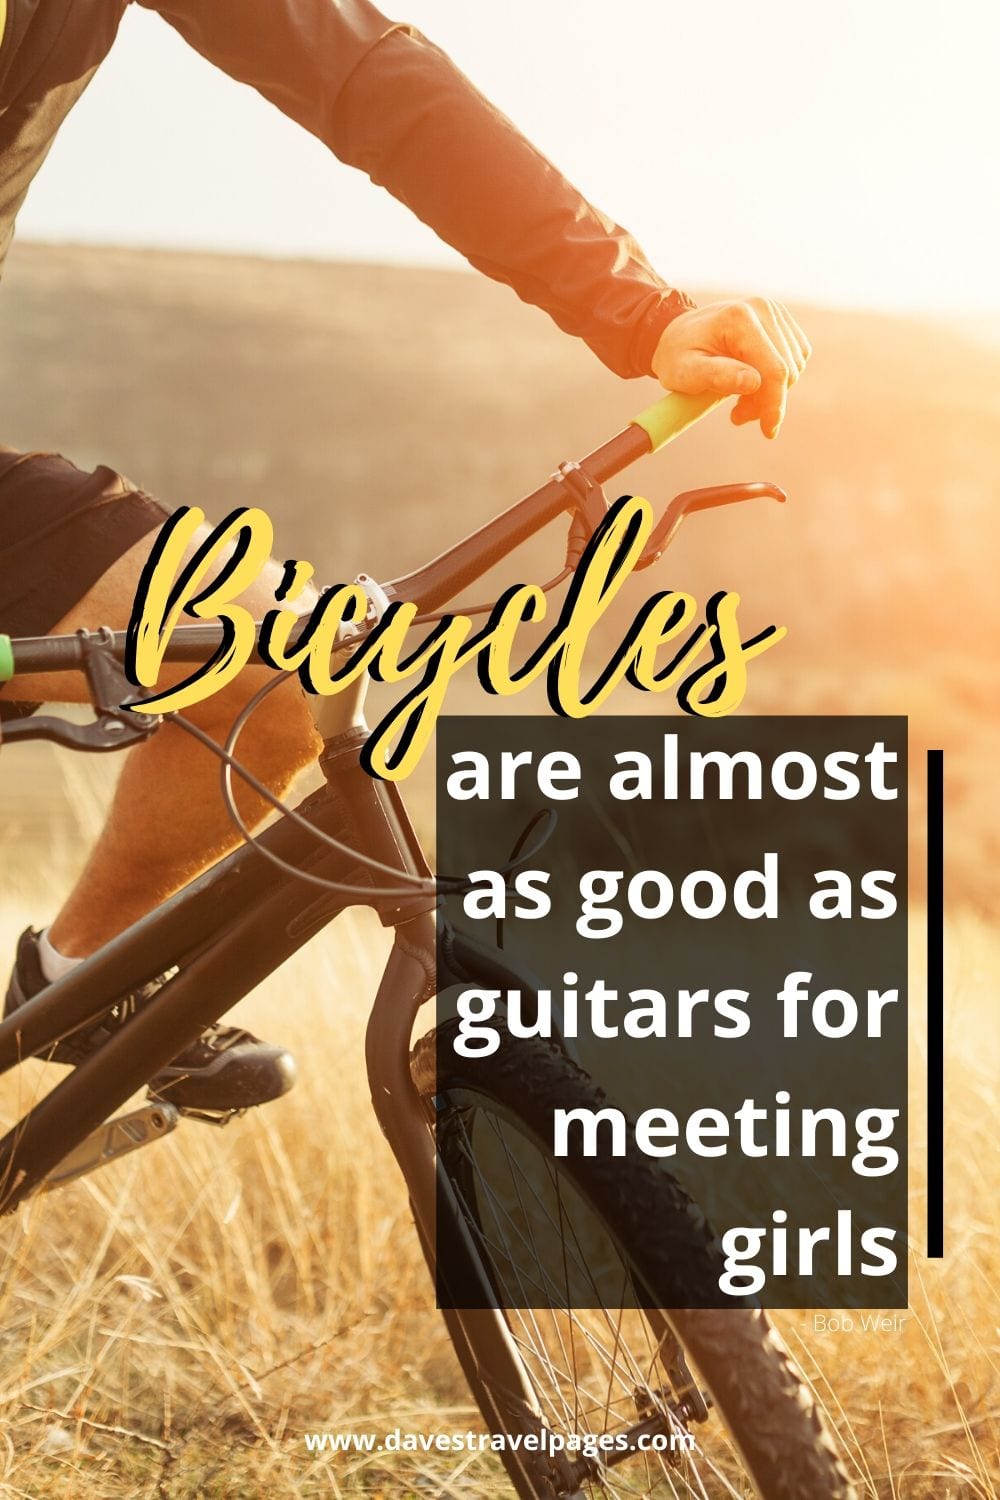 Cool bicycle quote - Bicycles are almost as good as guitars for meeting girls. ~ Bob Weir